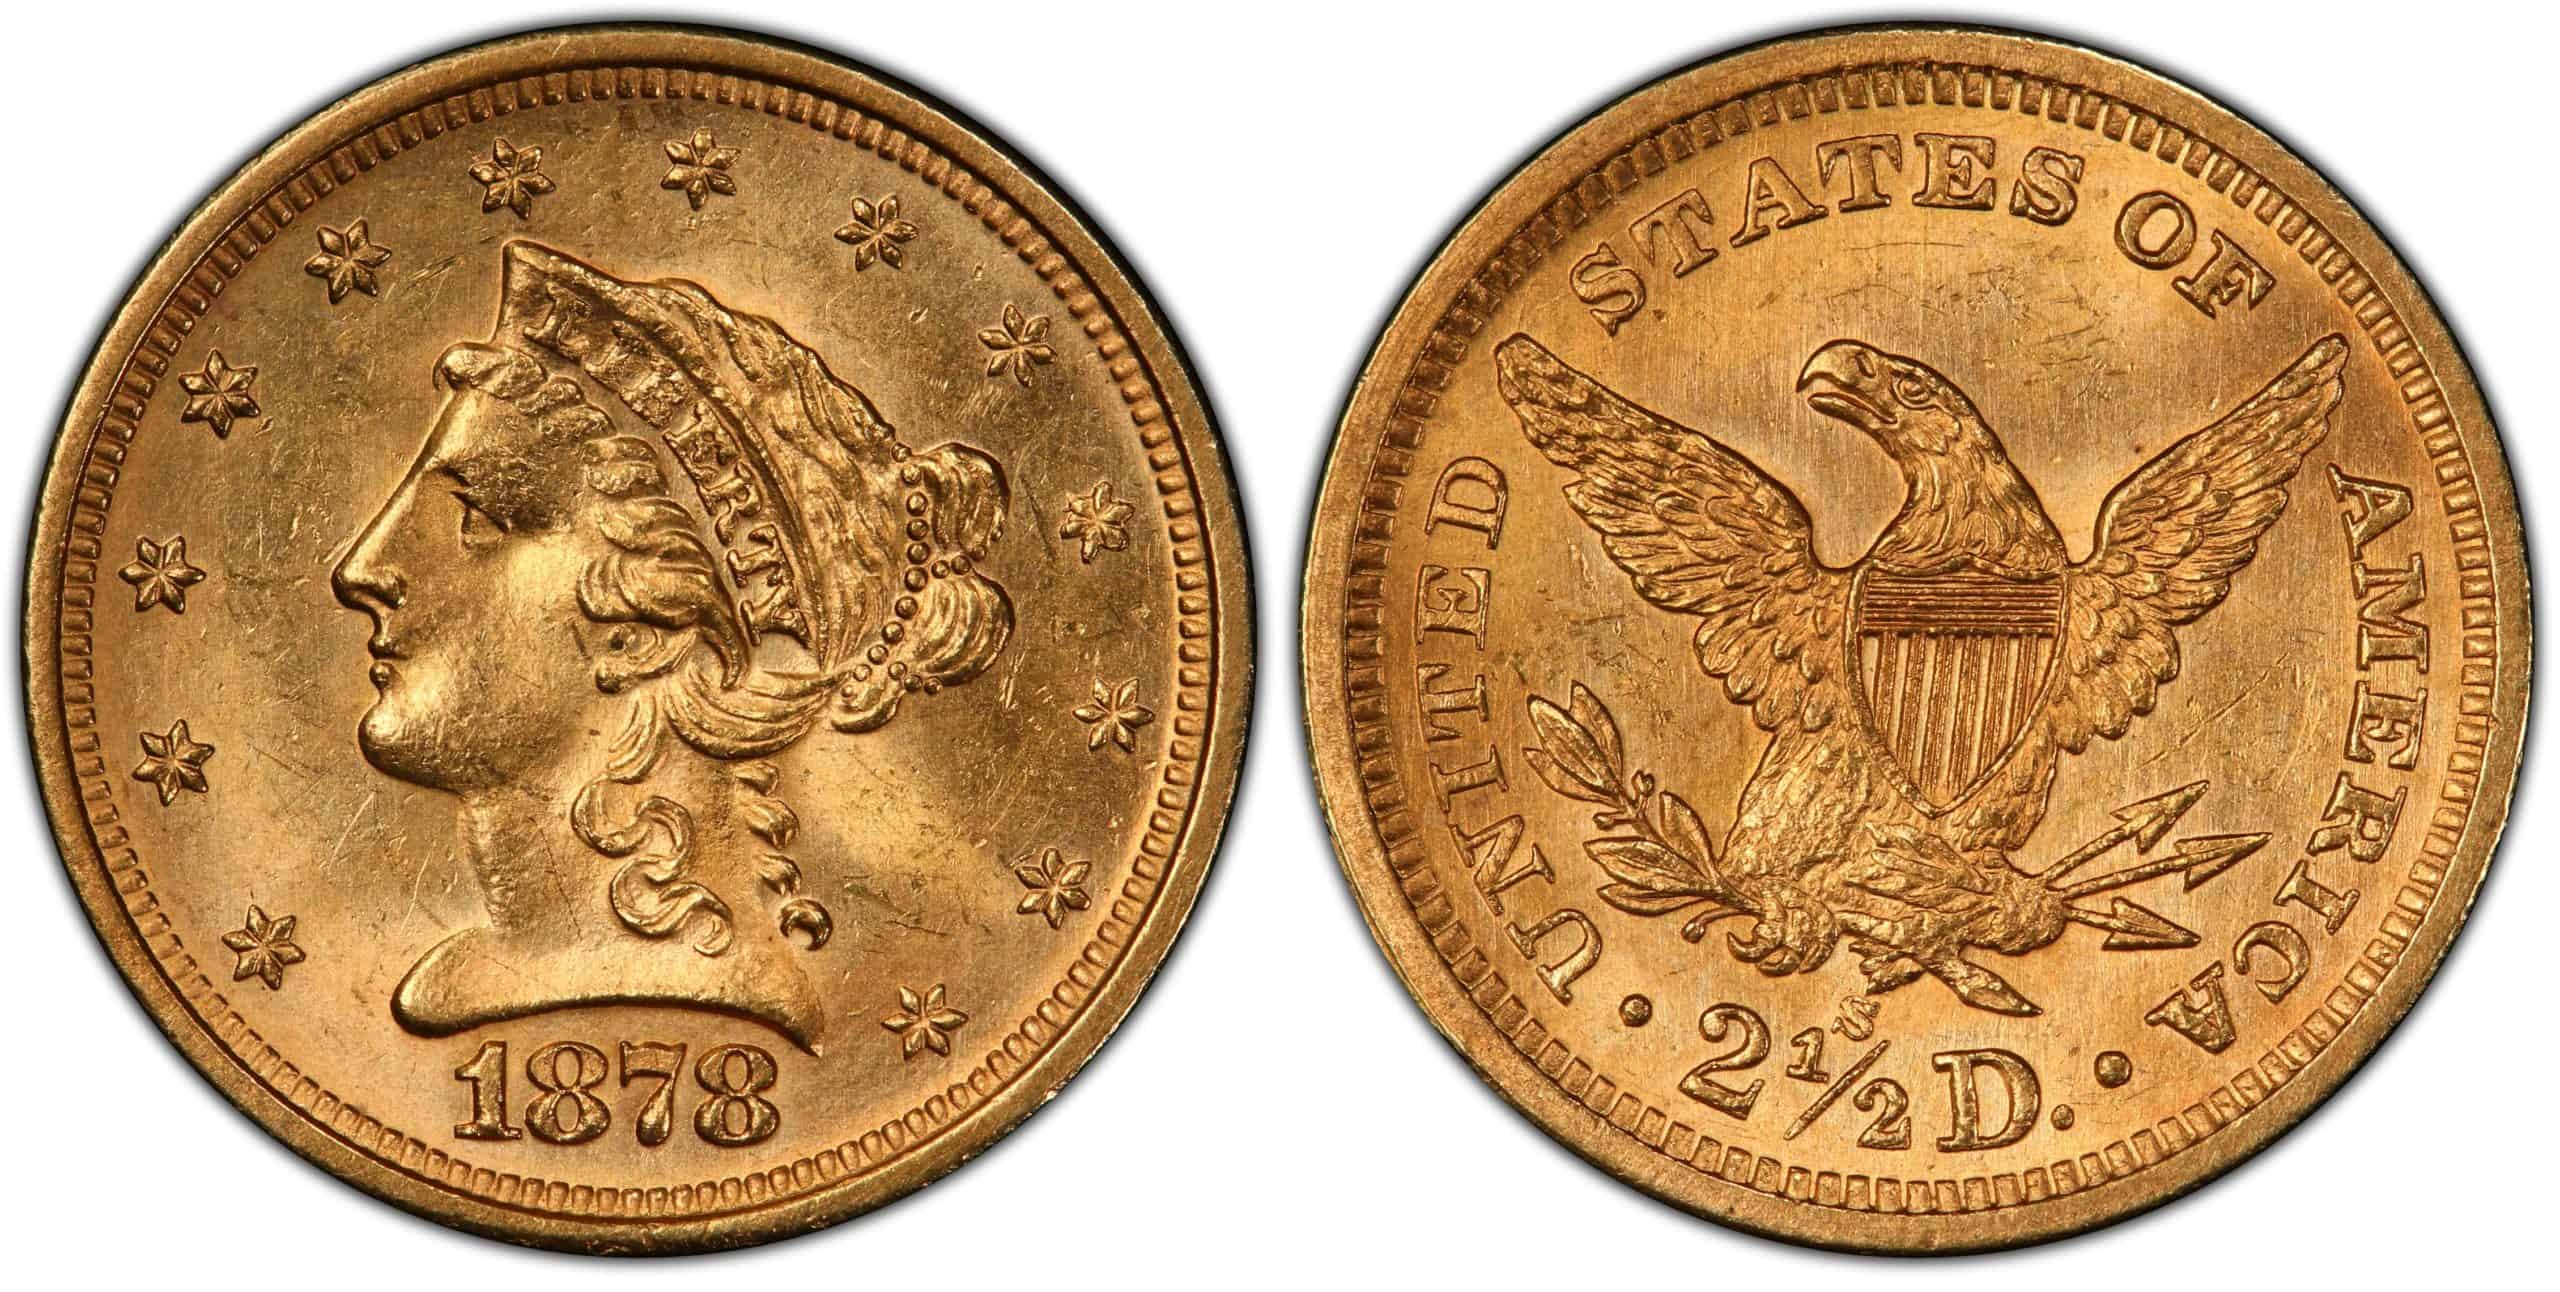 Features of Liberty 2.5 Dollar Gold Coins